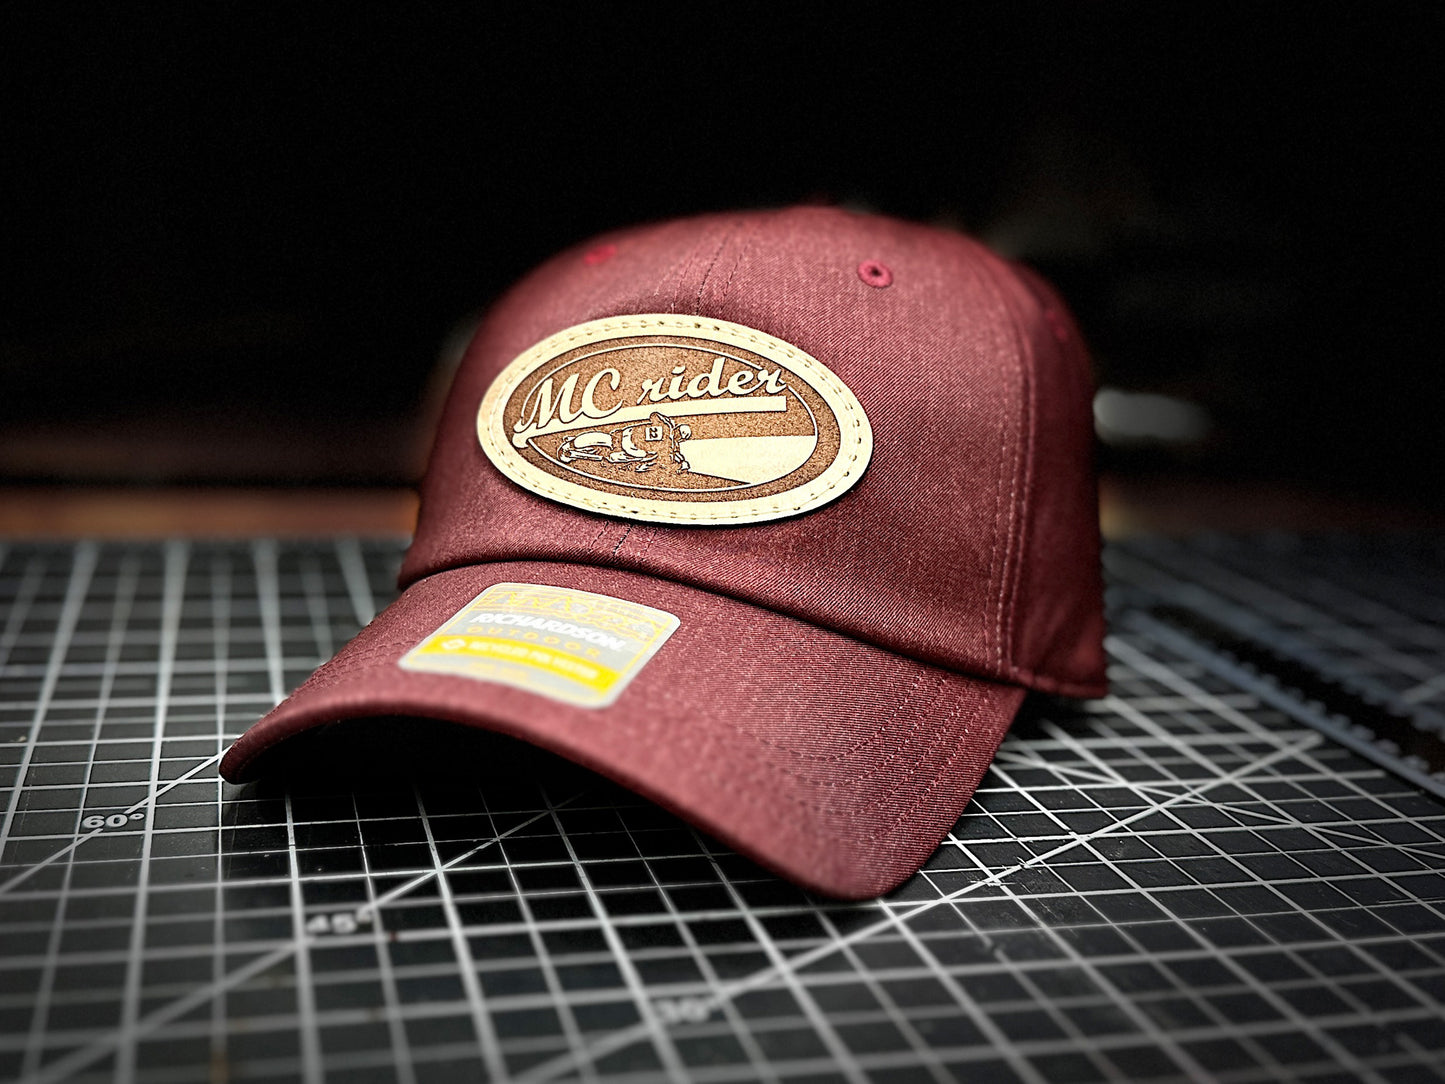 MCrider Hat: The same hat worn in the weekly videos.